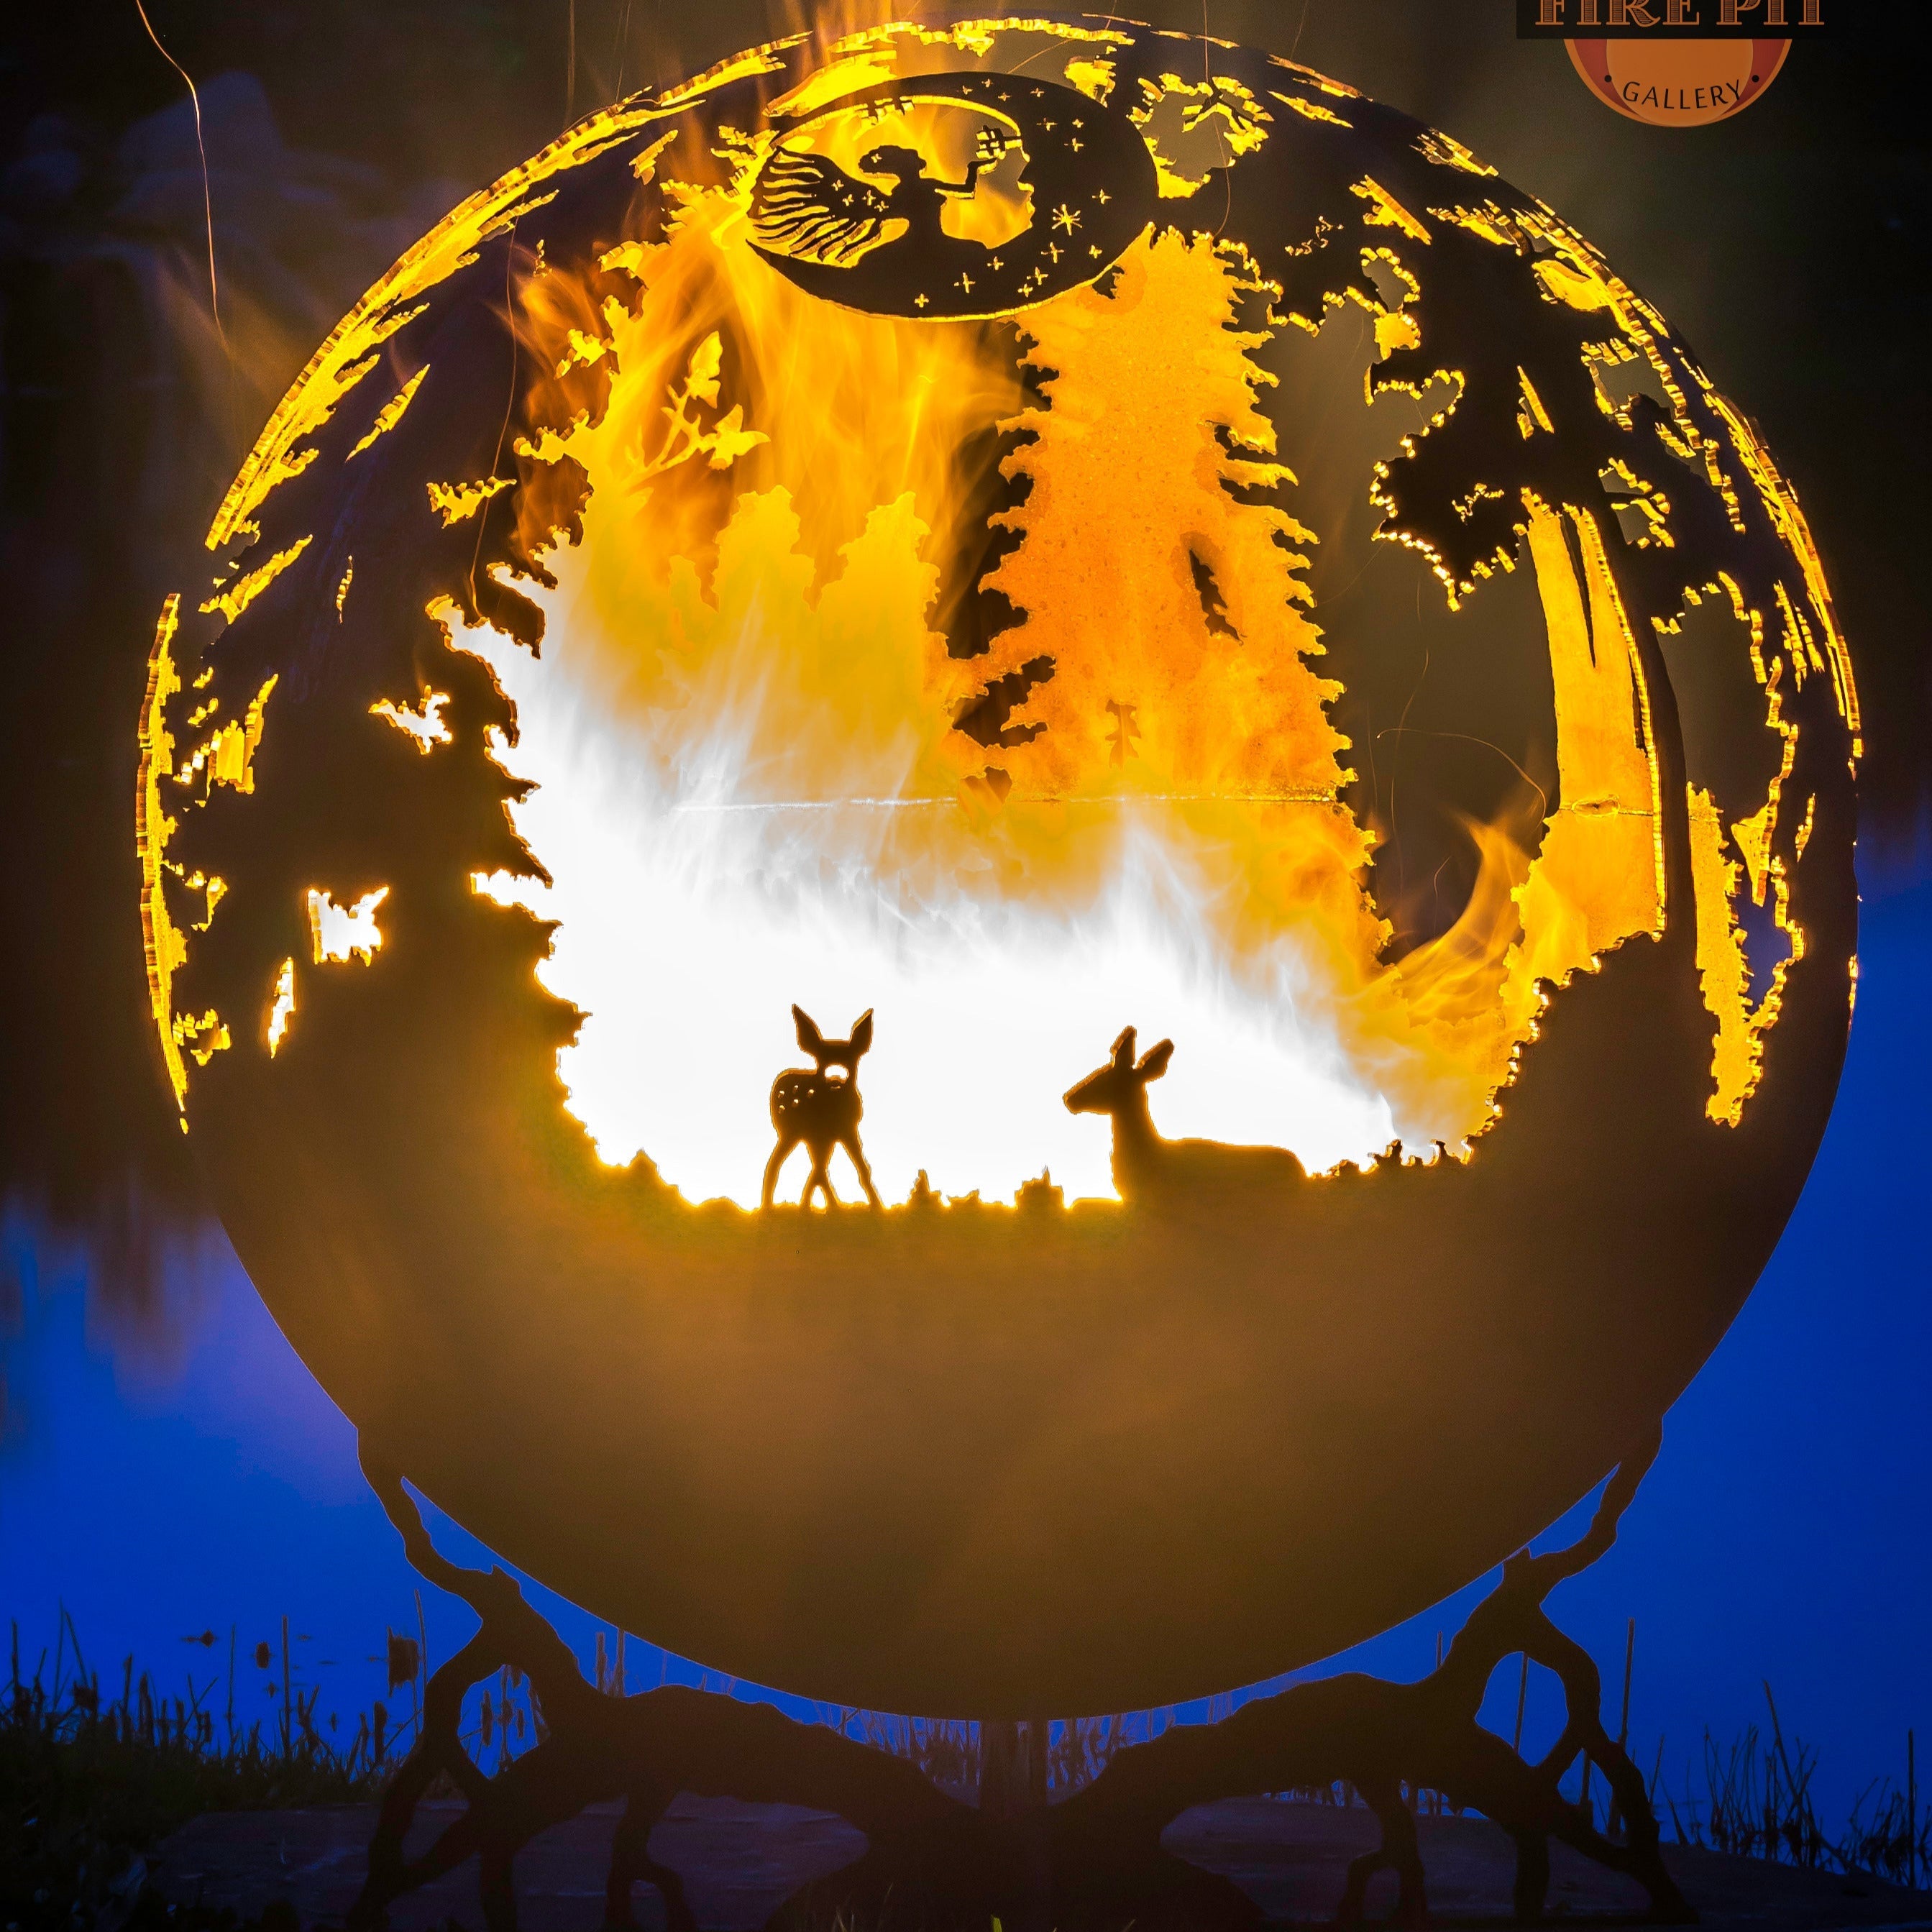 The Fire Pit Gallery Enchanted Woods – Fairy Fire Pit Sphere